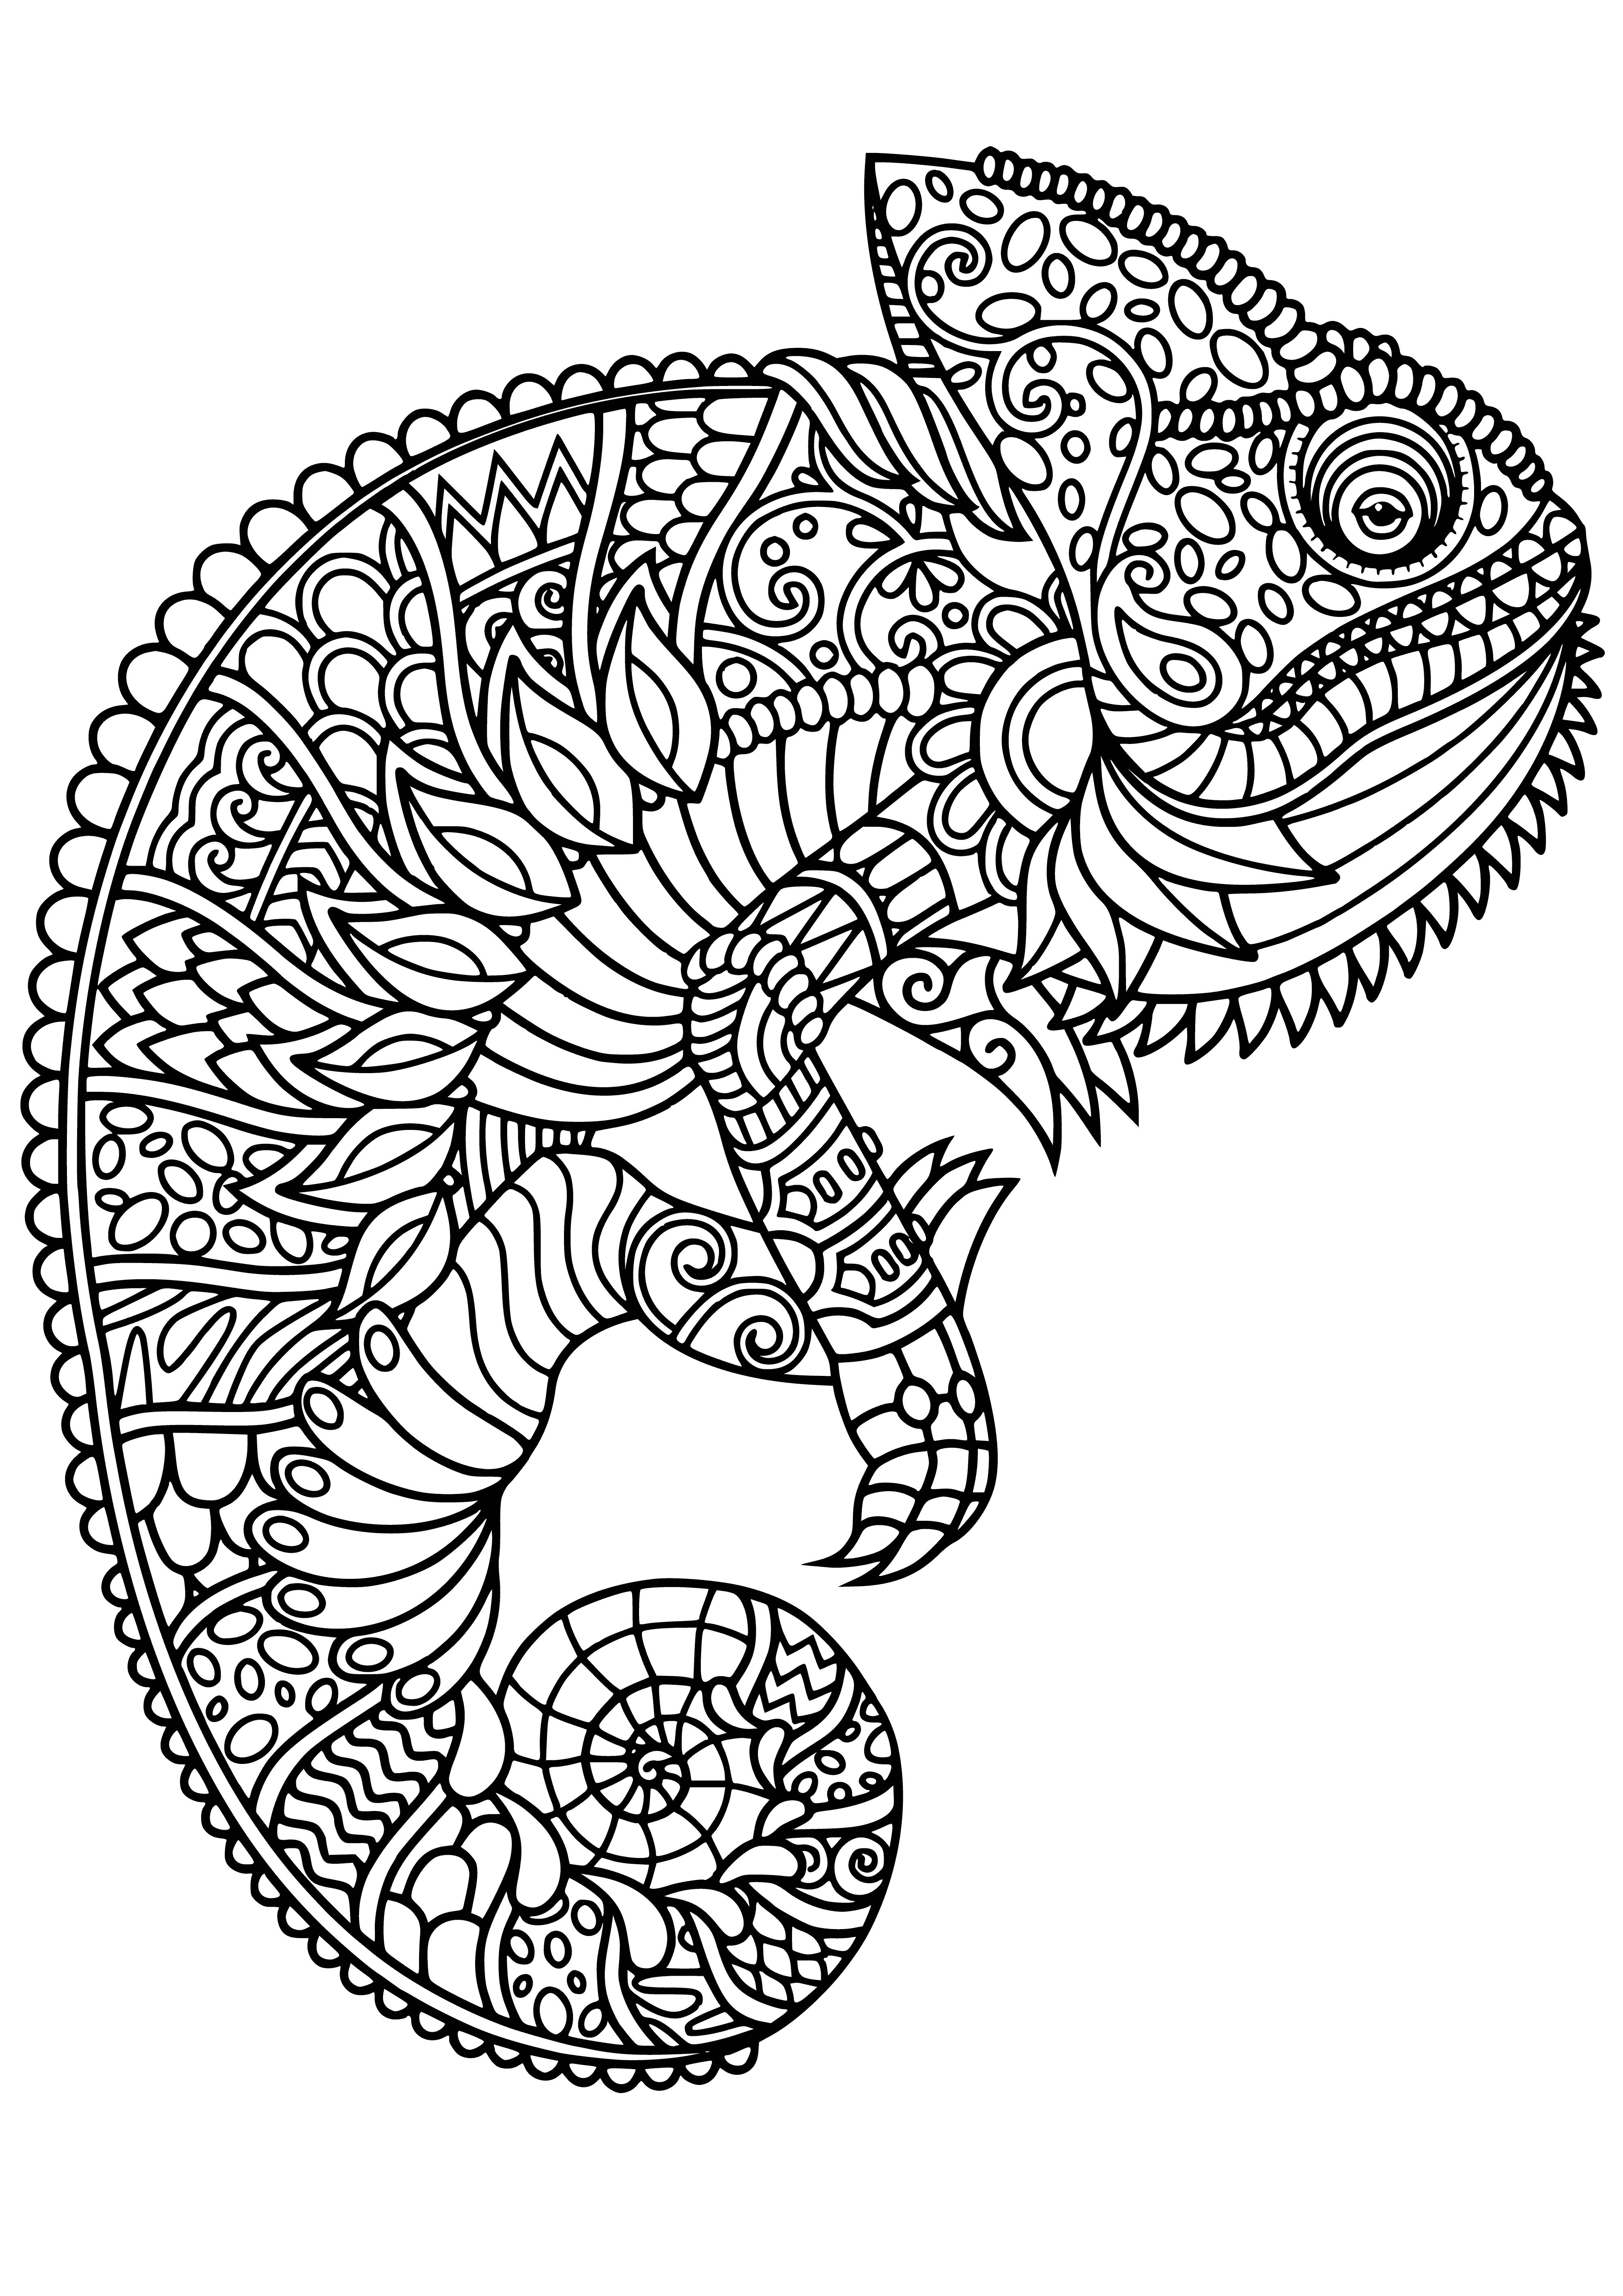 coloring page: Chameleon coloring page featuring a long tongued green & yellow chameleon reaching for a fly. #coloringpages #chameleon